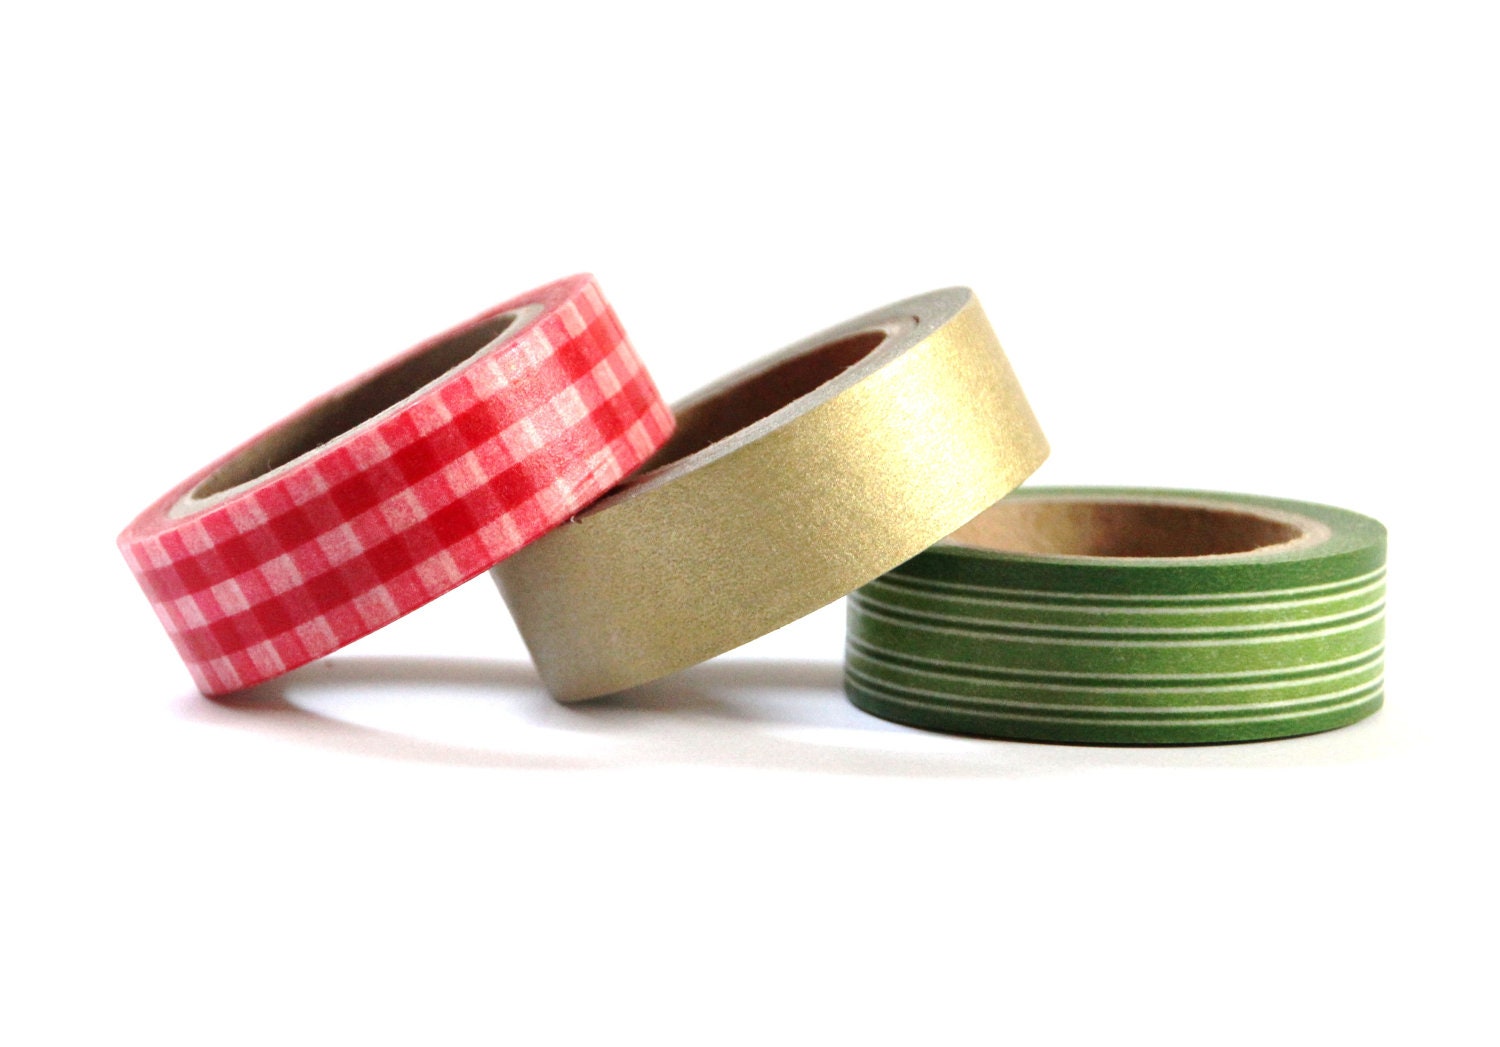 Set of 3 Rolls - Christmas Holiday Set of Red & White Gingham, Gold, and Green Stripe Masking Tape / Washi Tape (.60 inches x 33 feet) - BahanaSplitsBoutique